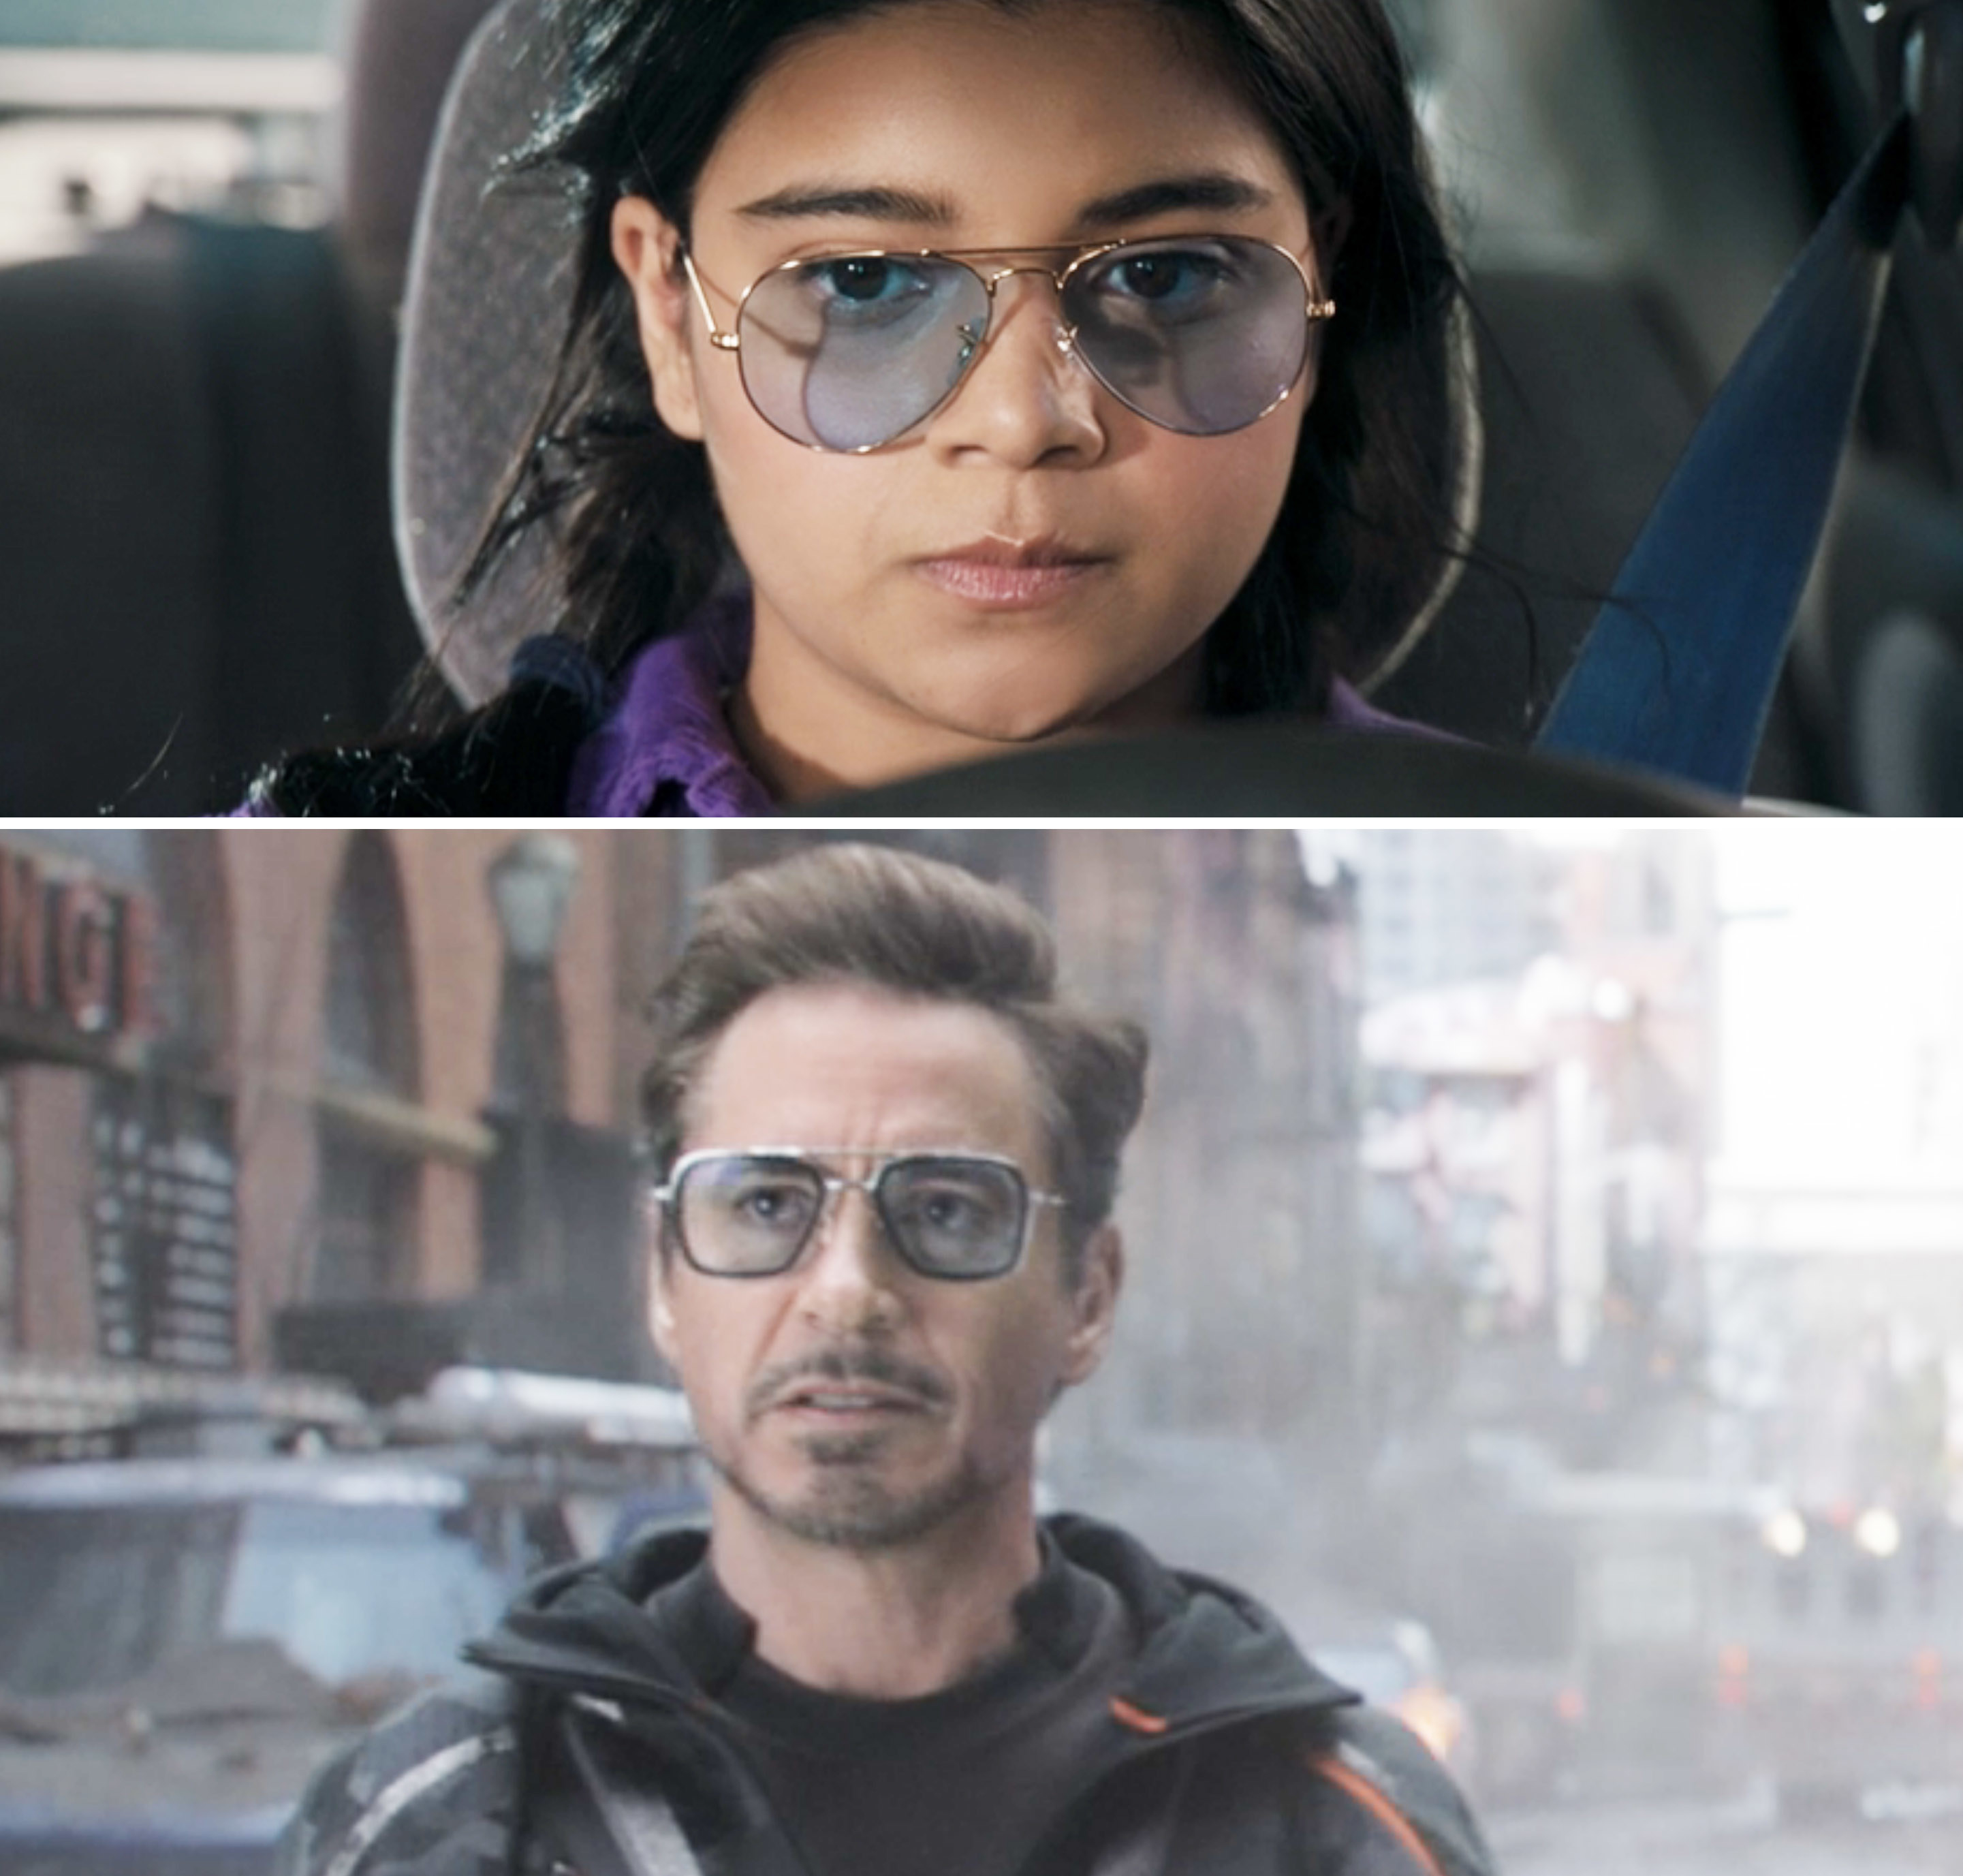 Side-by-side photos of Kamala and Tony Stark wearing glasses tinted a similar color